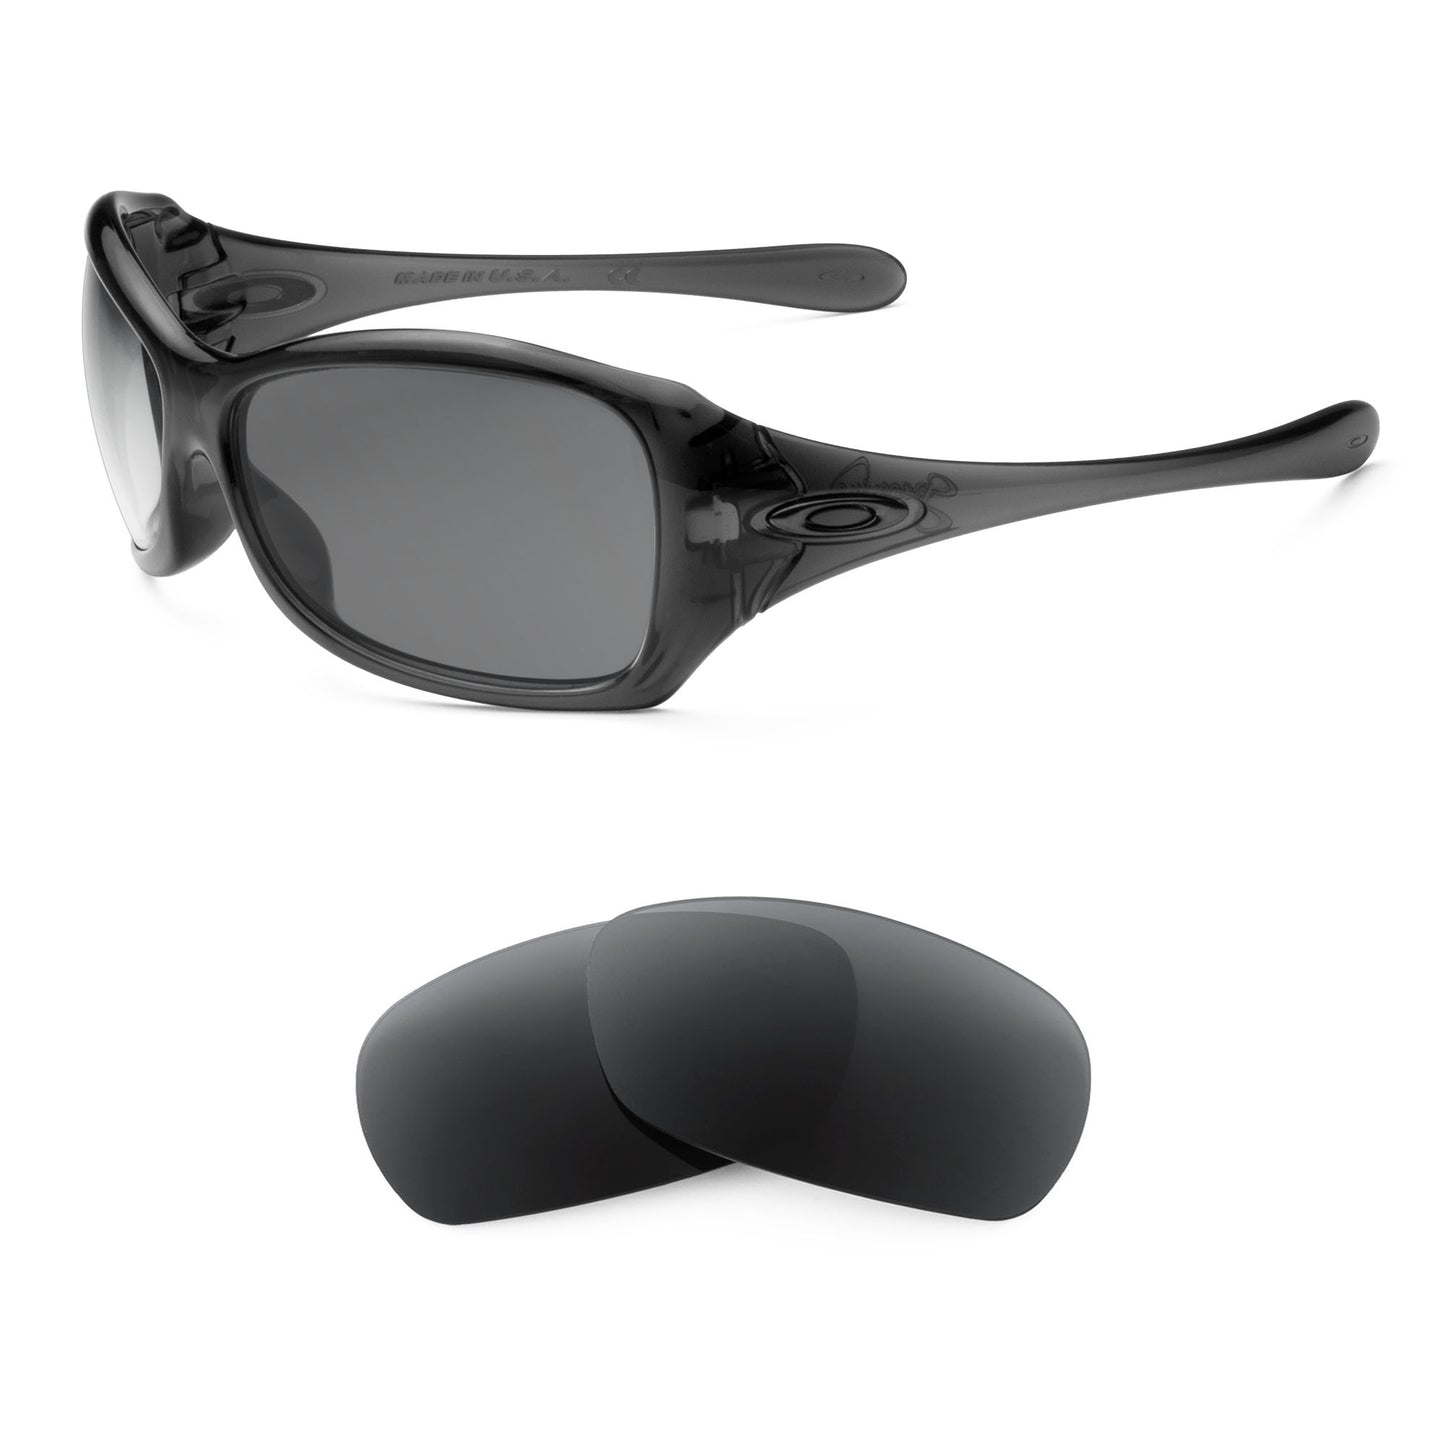 Oakley Grapevine sunglasses with replacement lenses